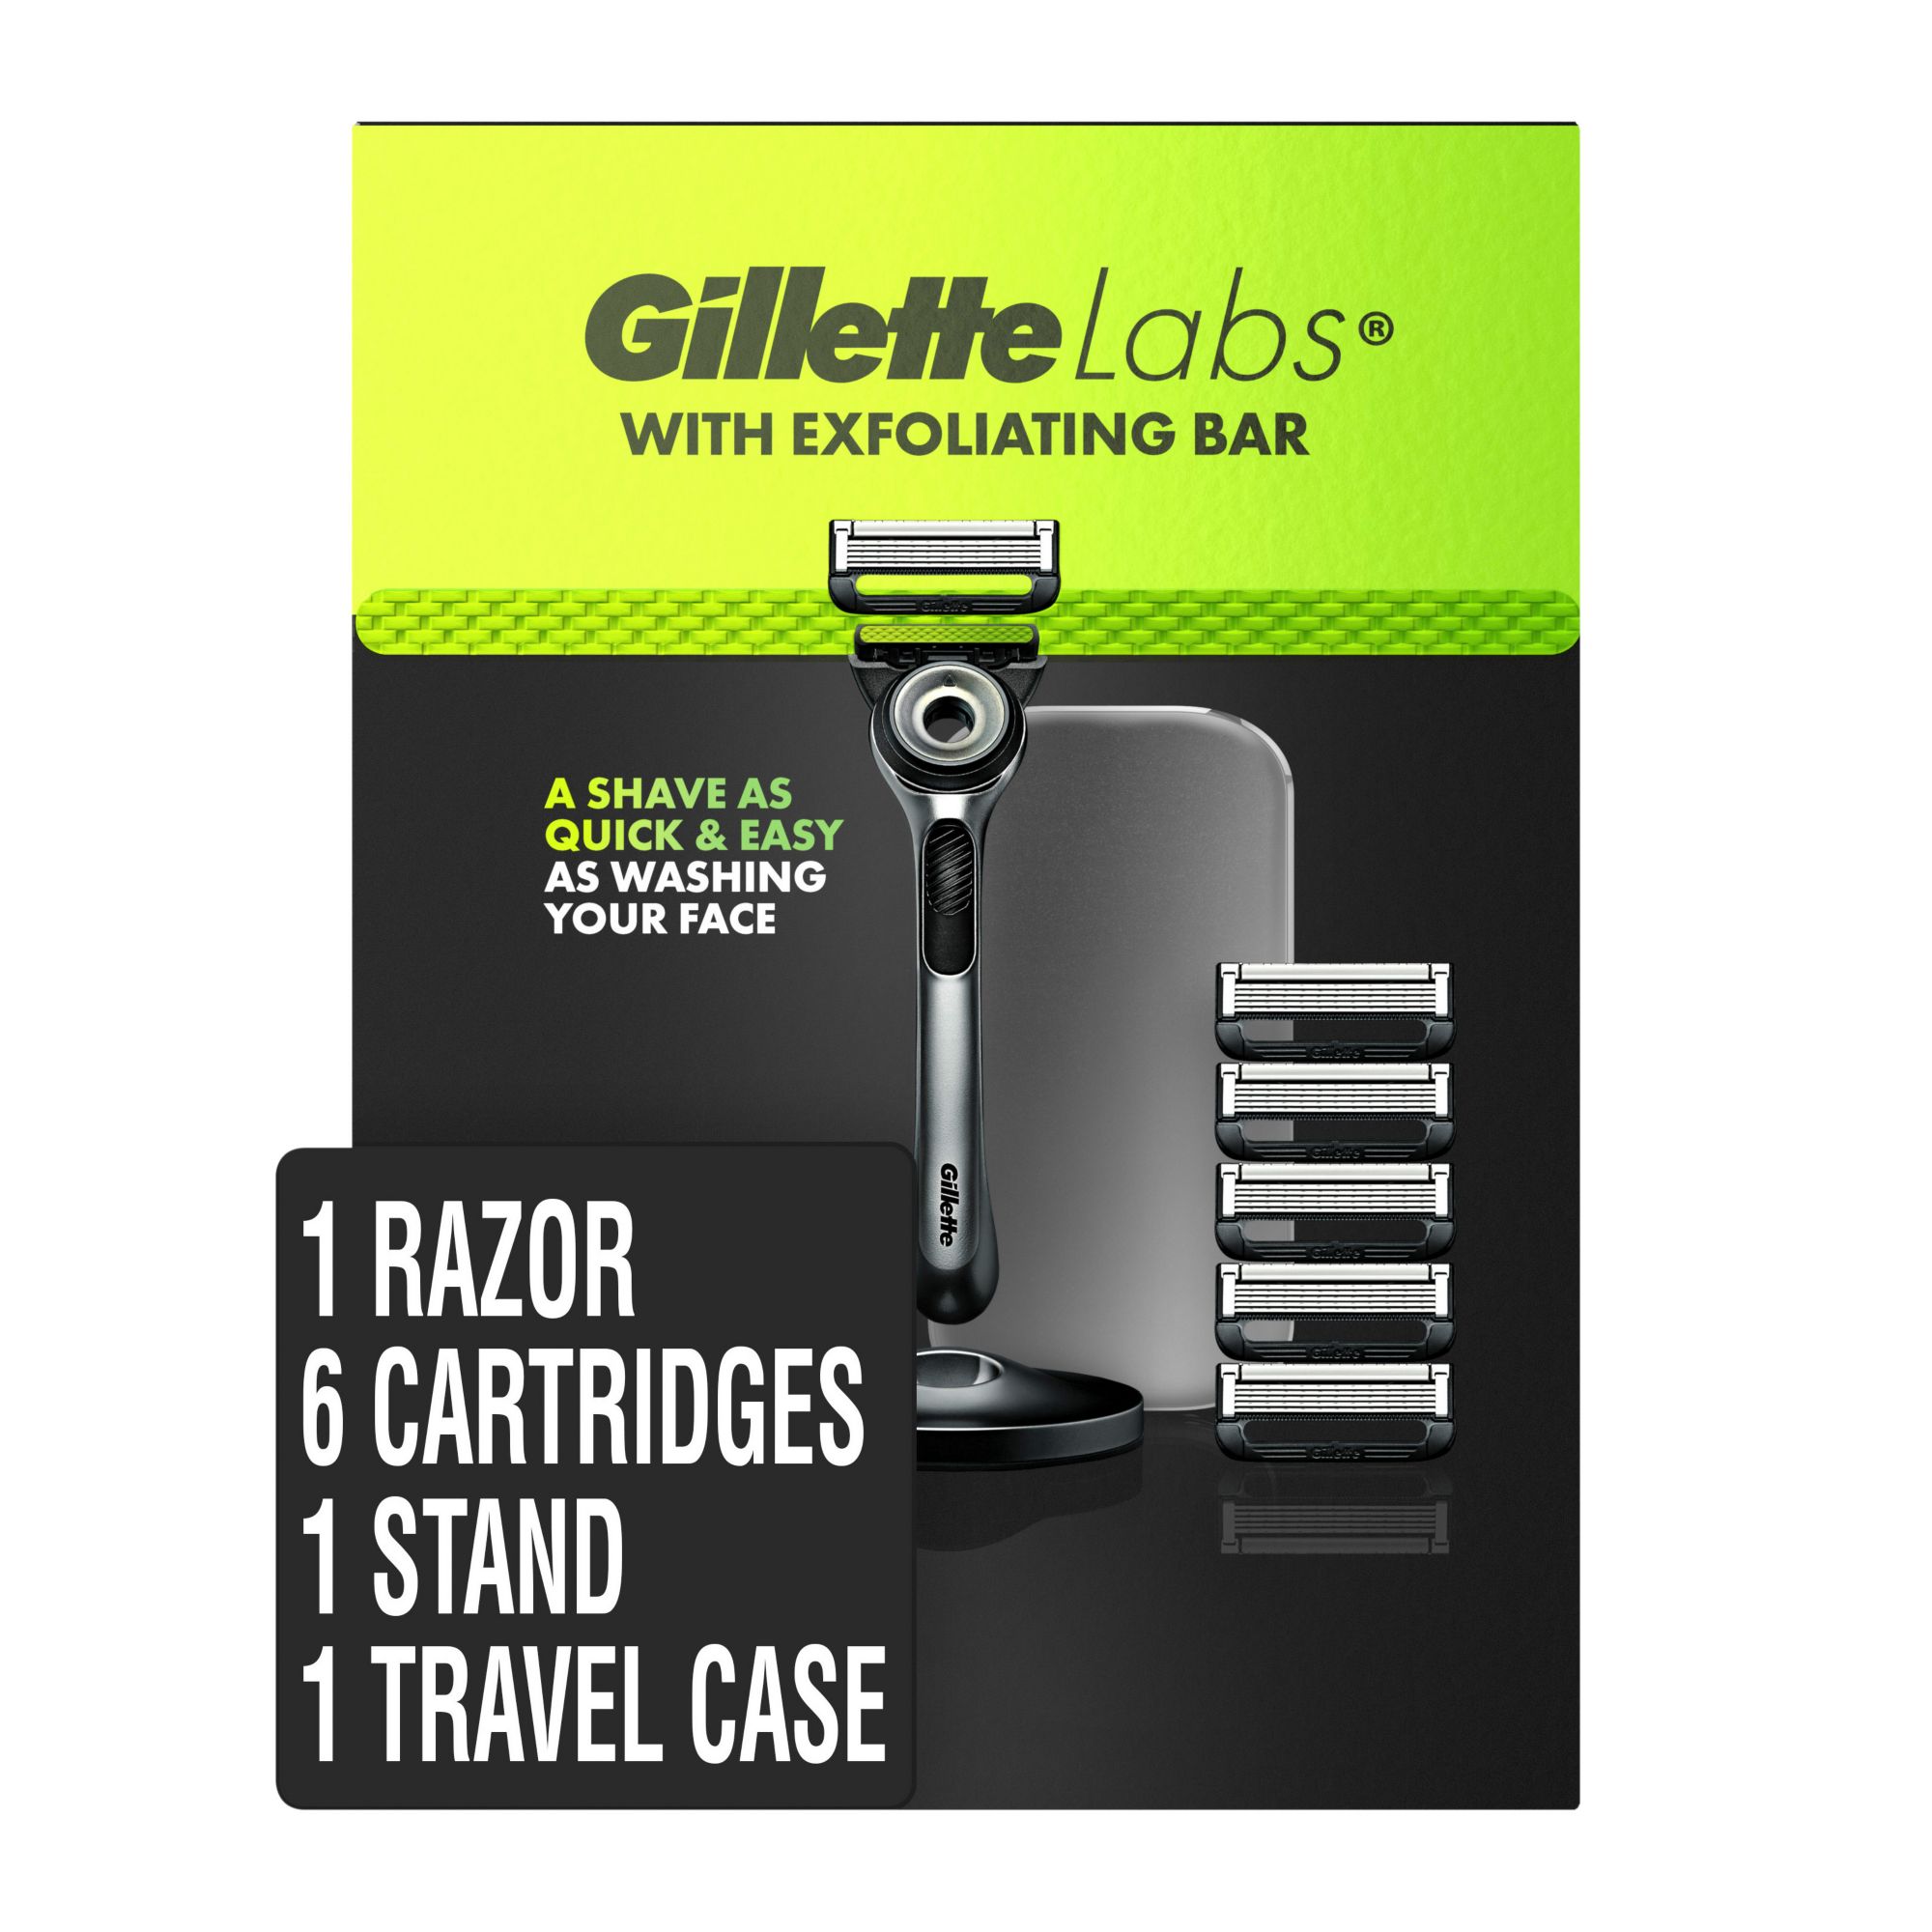 GilletteLabs with Exfoliating Bar Razor and Travel Case for Storage on the Go